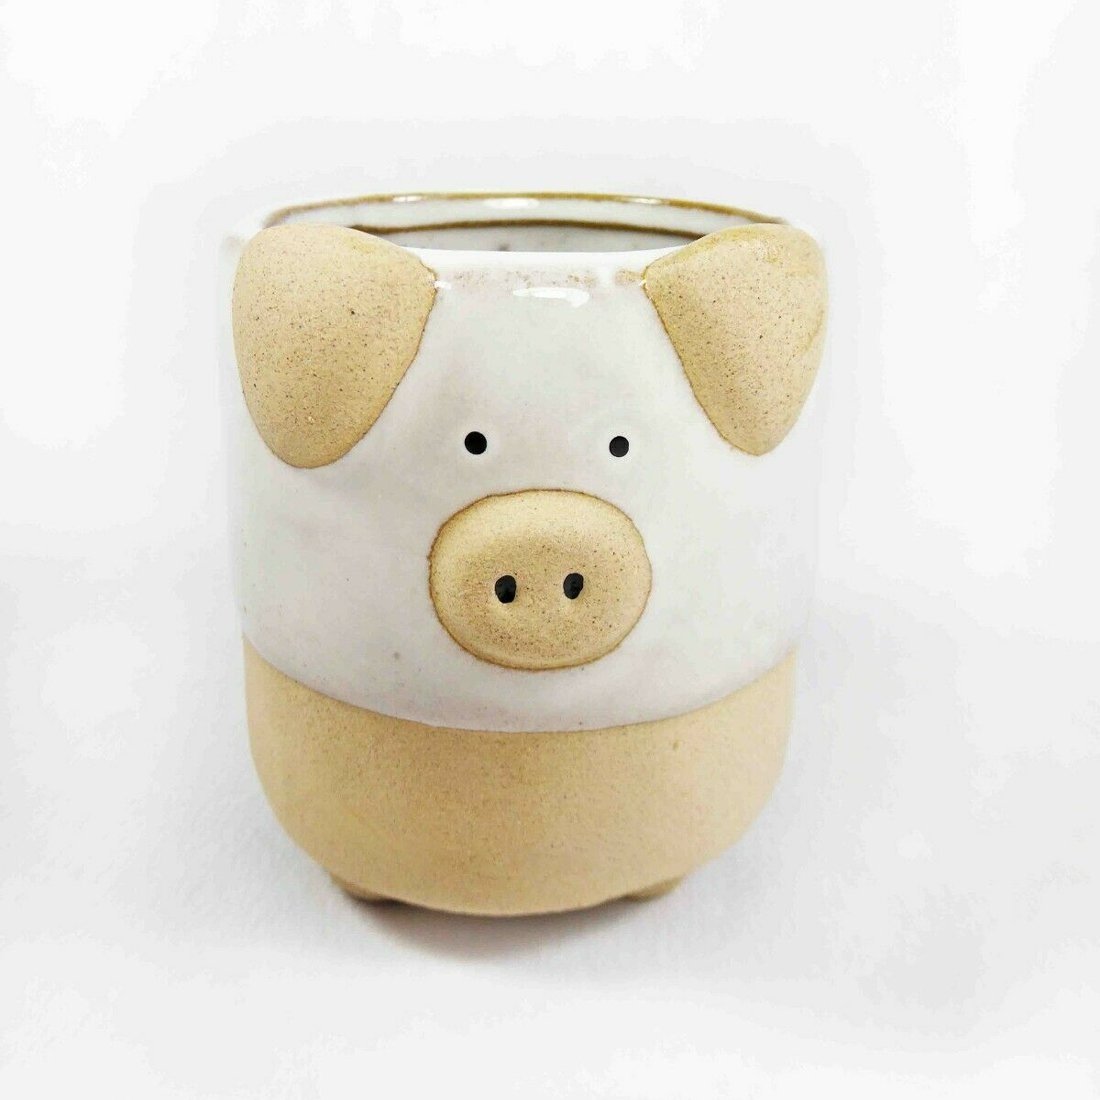 Farmyard Animal Ceramic Planters (3 Styles Available) - Indoor Outdoors